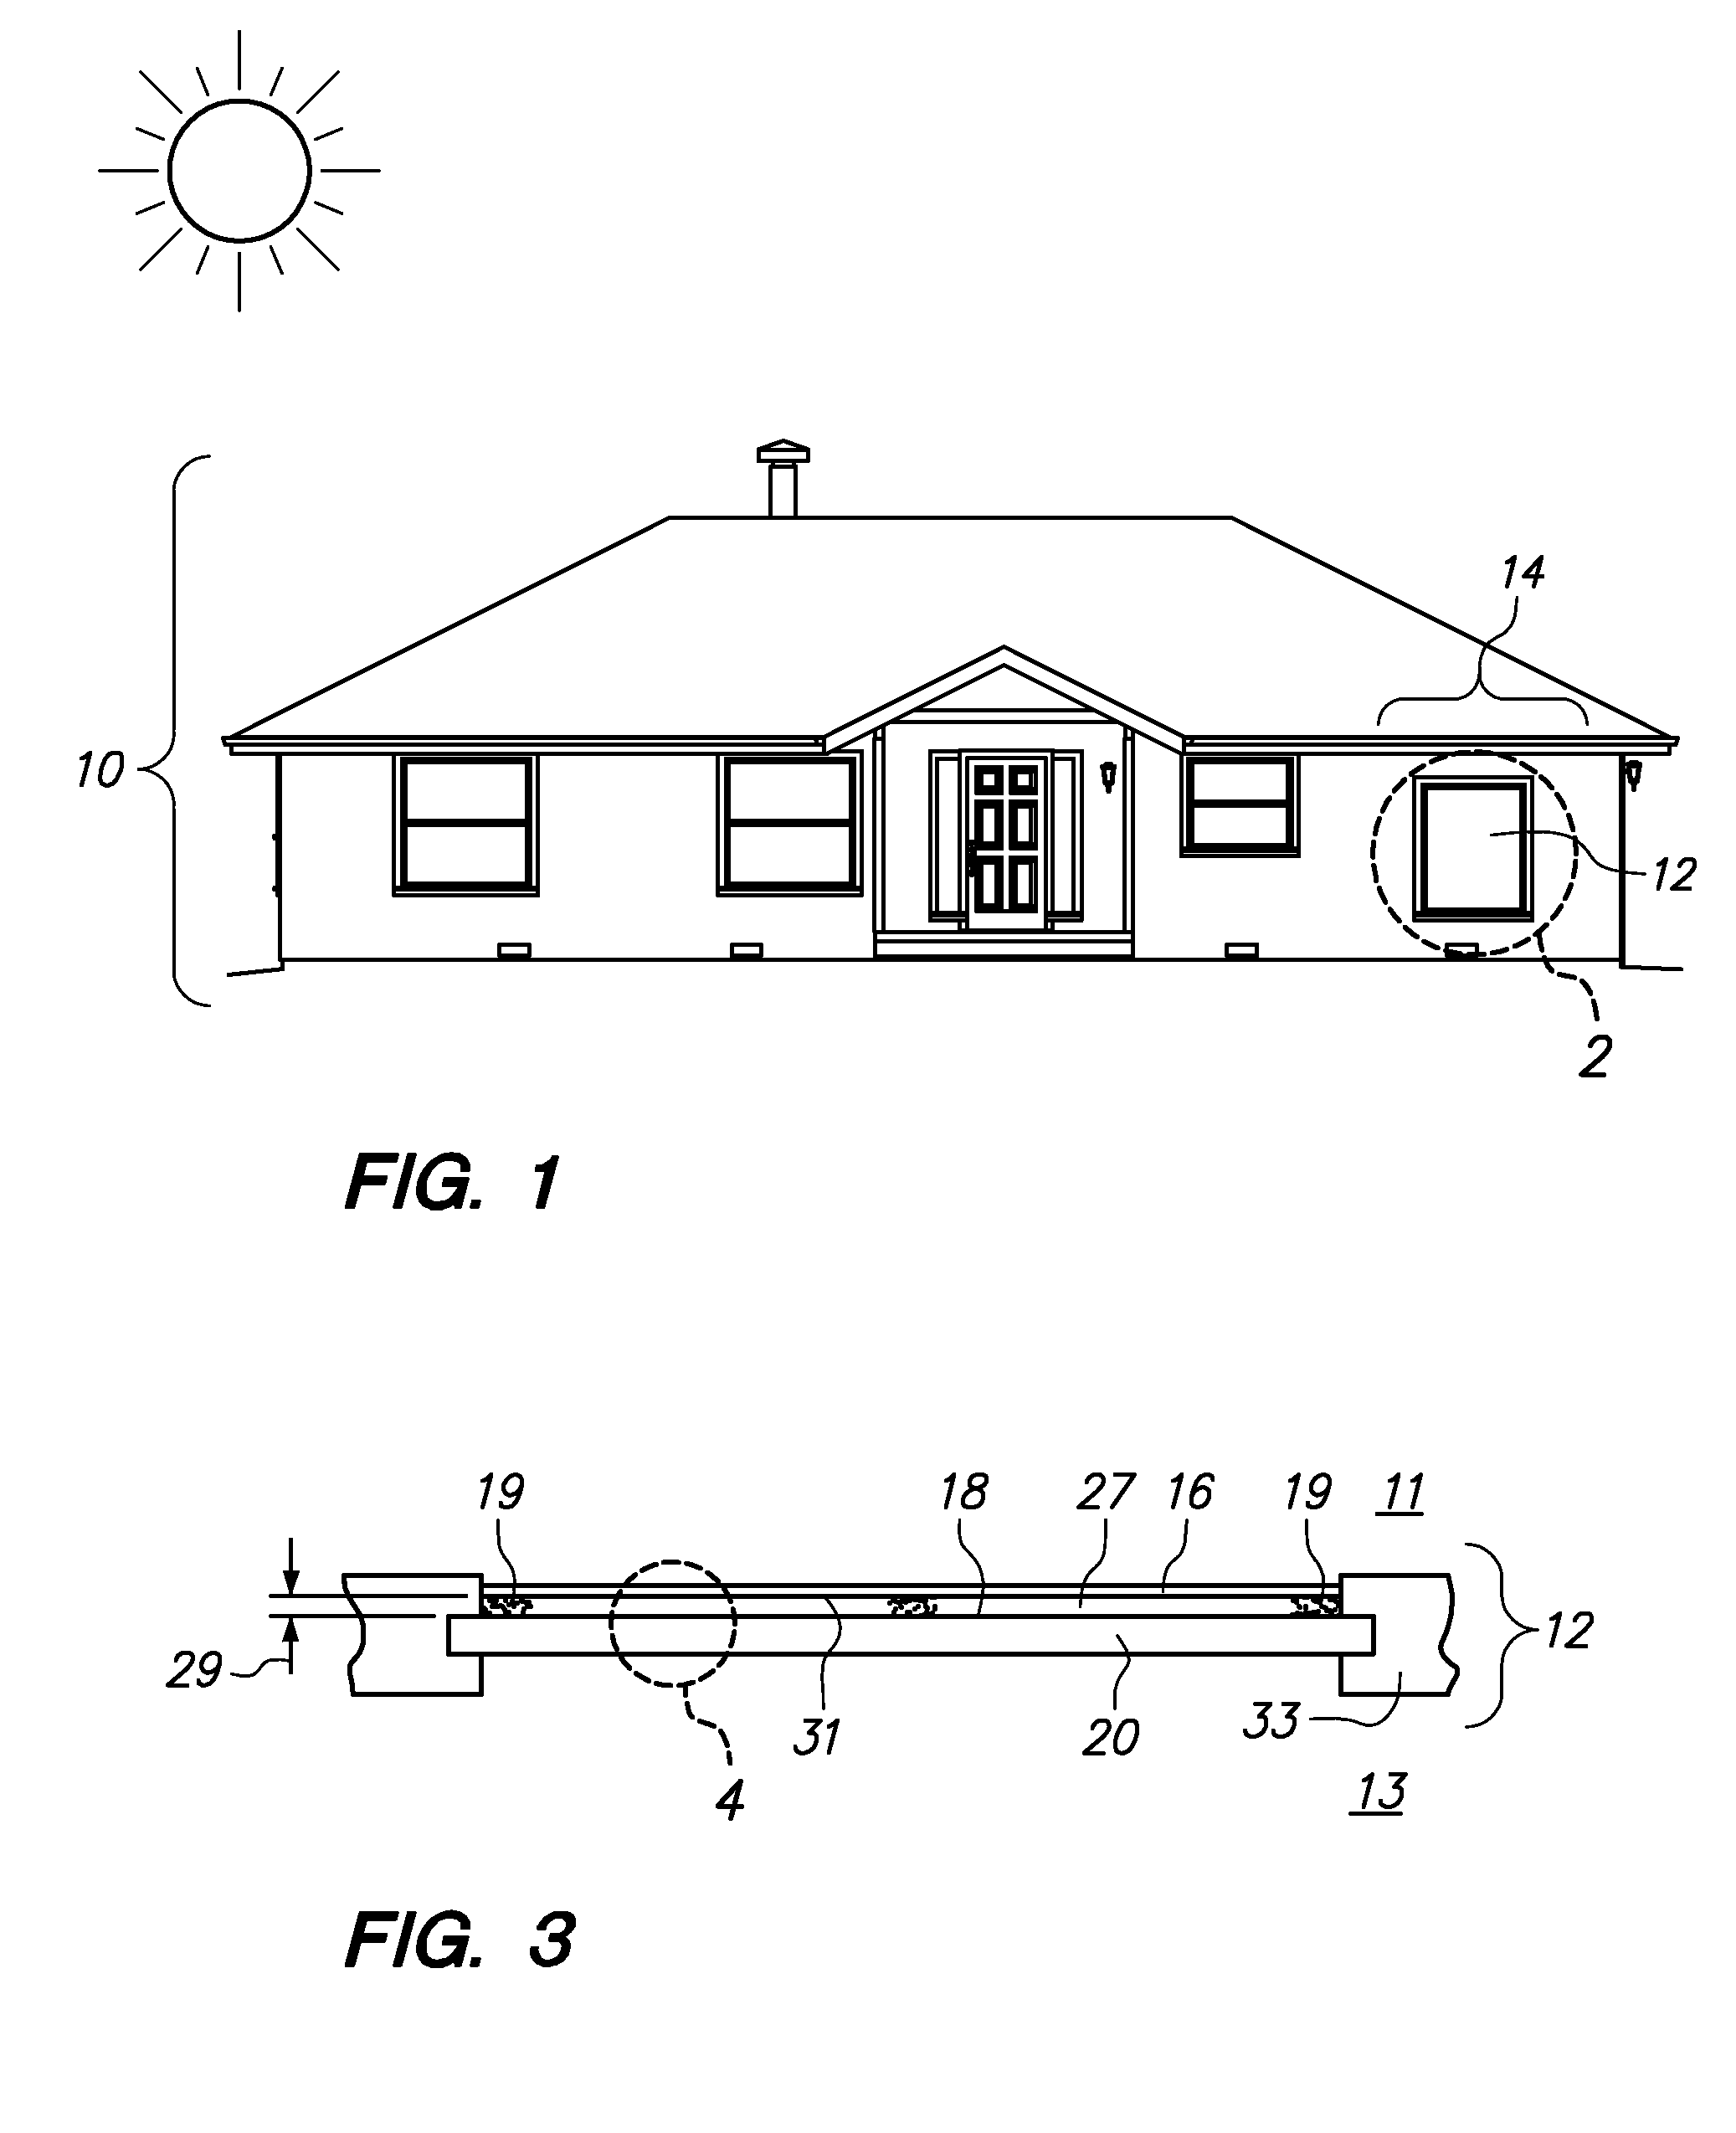 Spectral Selective Solar Control Film Containing an Air Layer for Windows